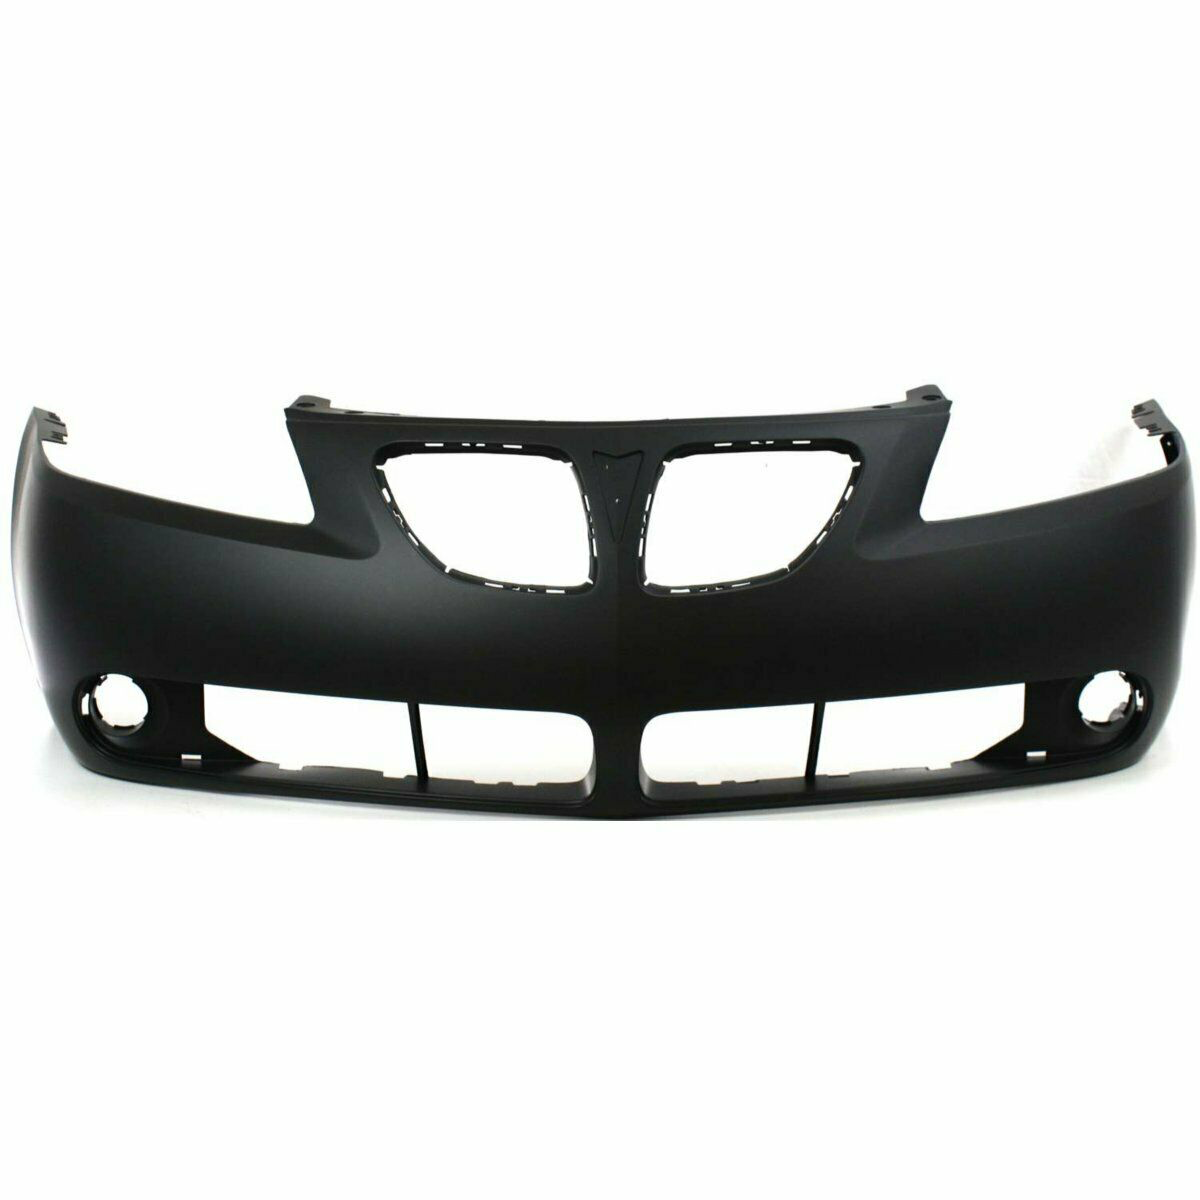 2008 Pontiac G6 Front Bumper Painted to Match